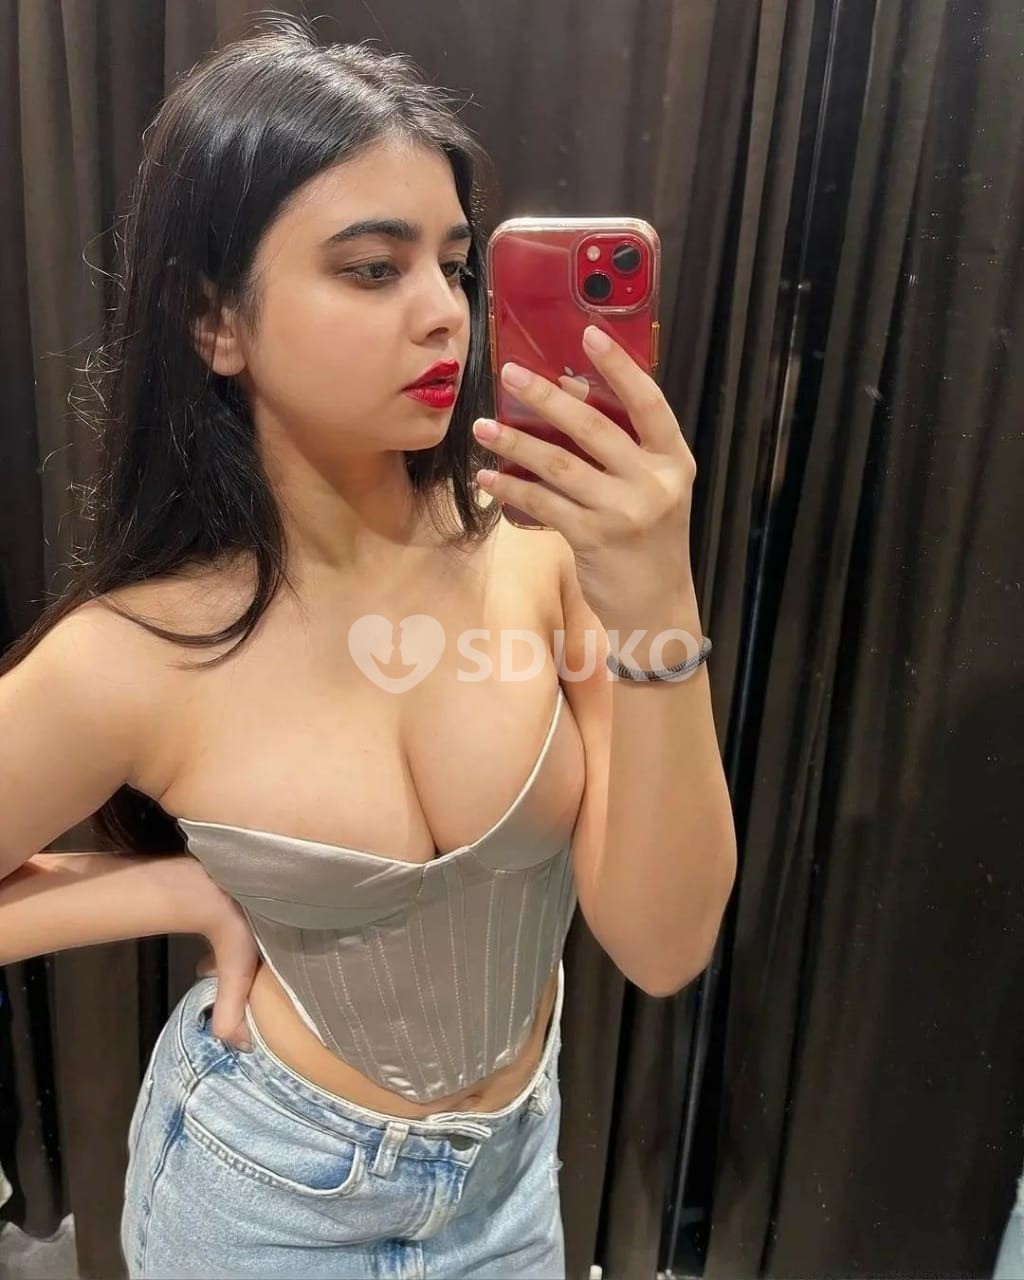 .SARKHEJ. CALL ME PAYAL LOW PRICE UNLIMITED SHOOT 100% GENUINE SEXY VIP CALL GIRLS ARE PROVIDED SECURE SERVICES CALL 24 